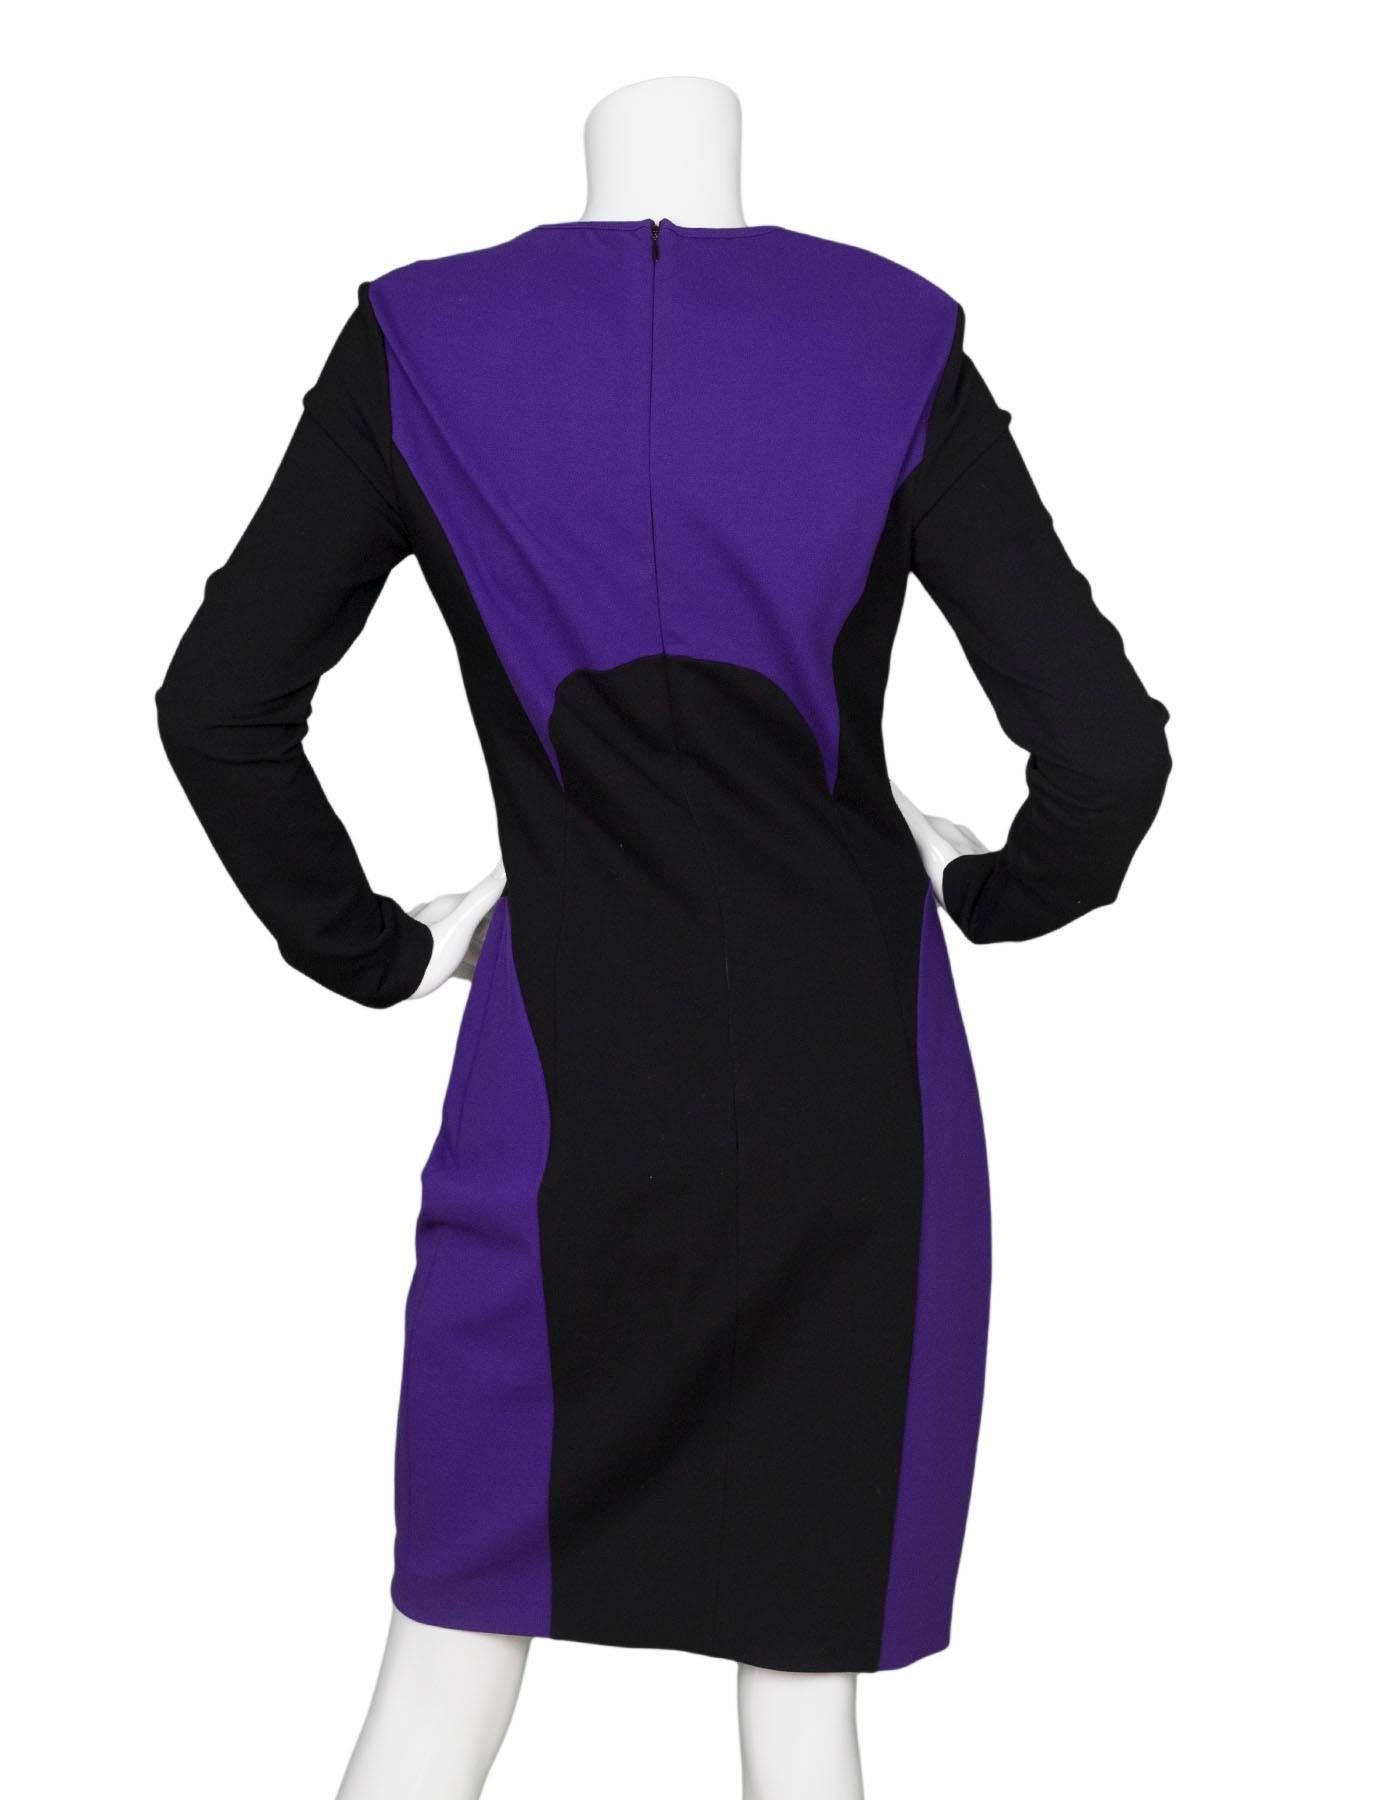 Michael Kors Purple & Black Sheath Dress sz US8 In Excellent Condition In New York, NY